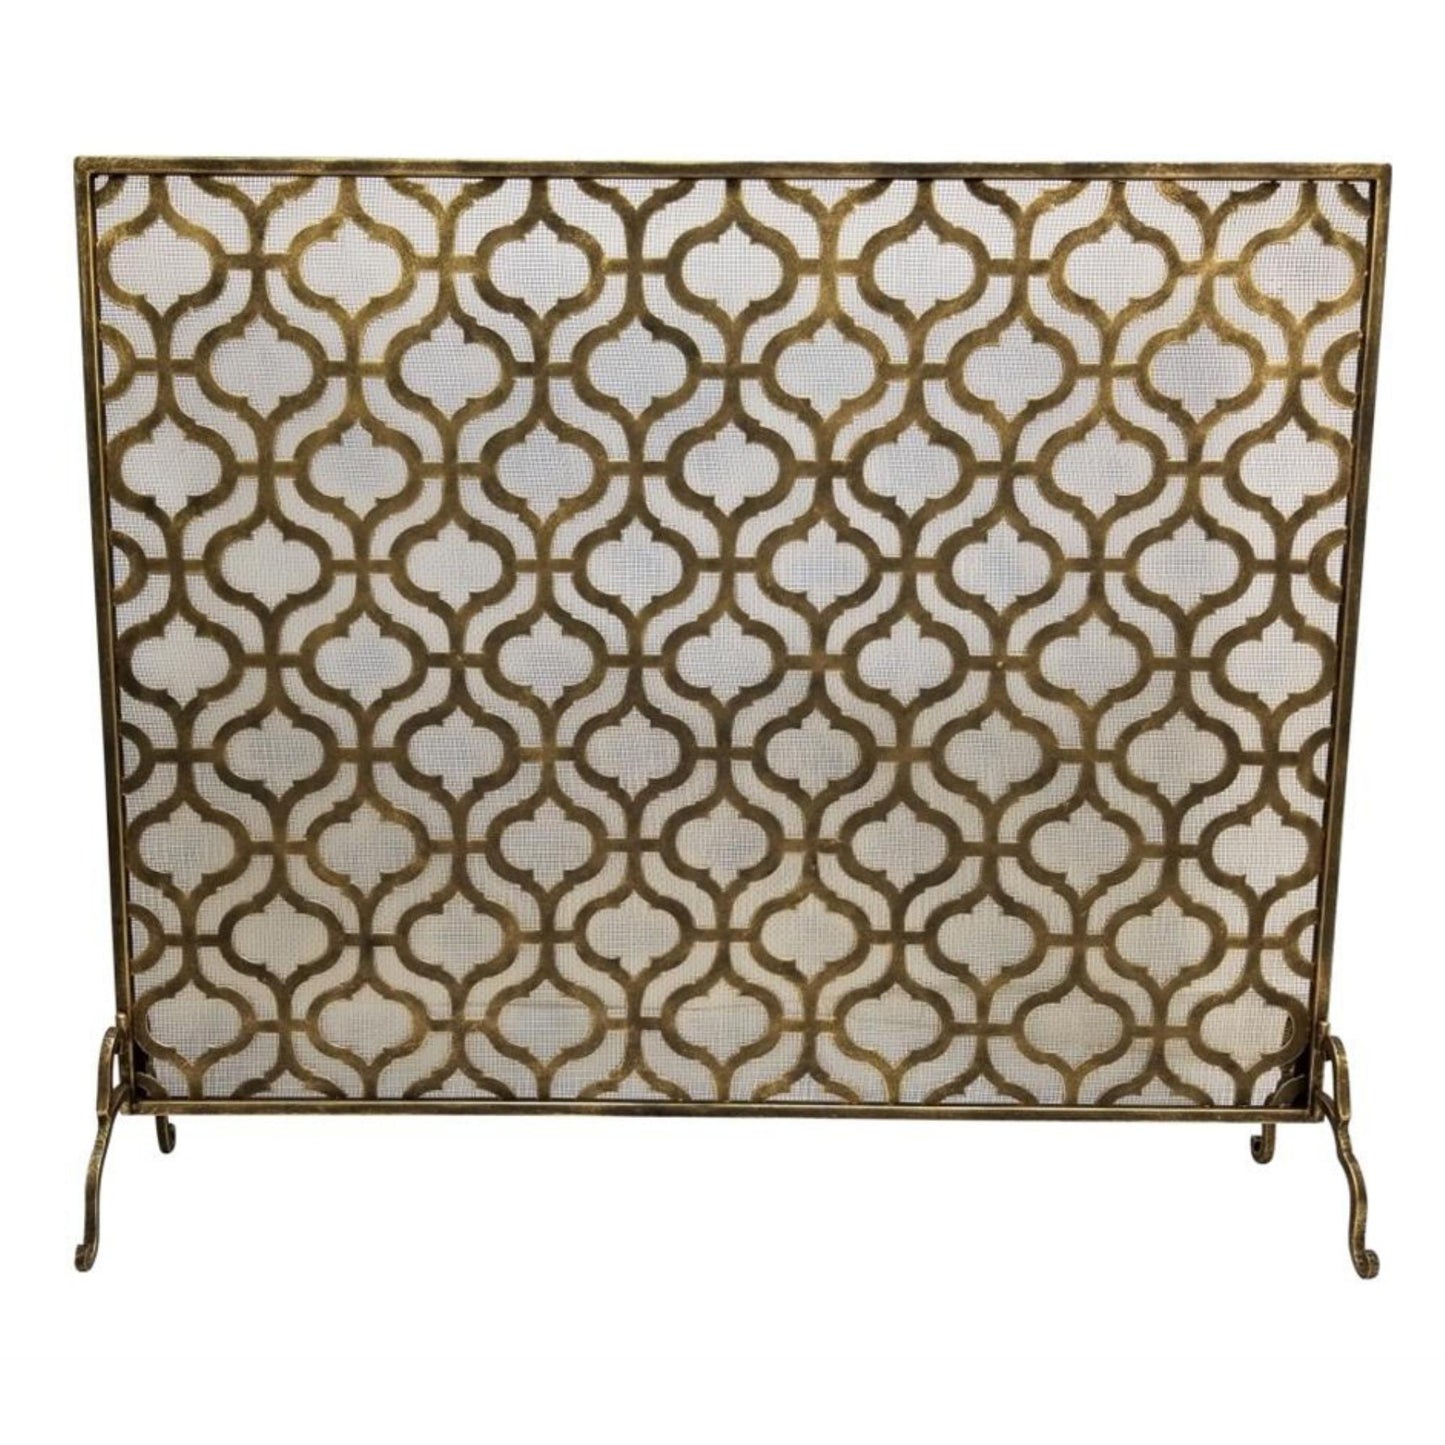 Large Iron Fire Screen with Quadrille Design - Light Burnished Gold Single Panel Fireplace Screen | InsideOutCatalog.com